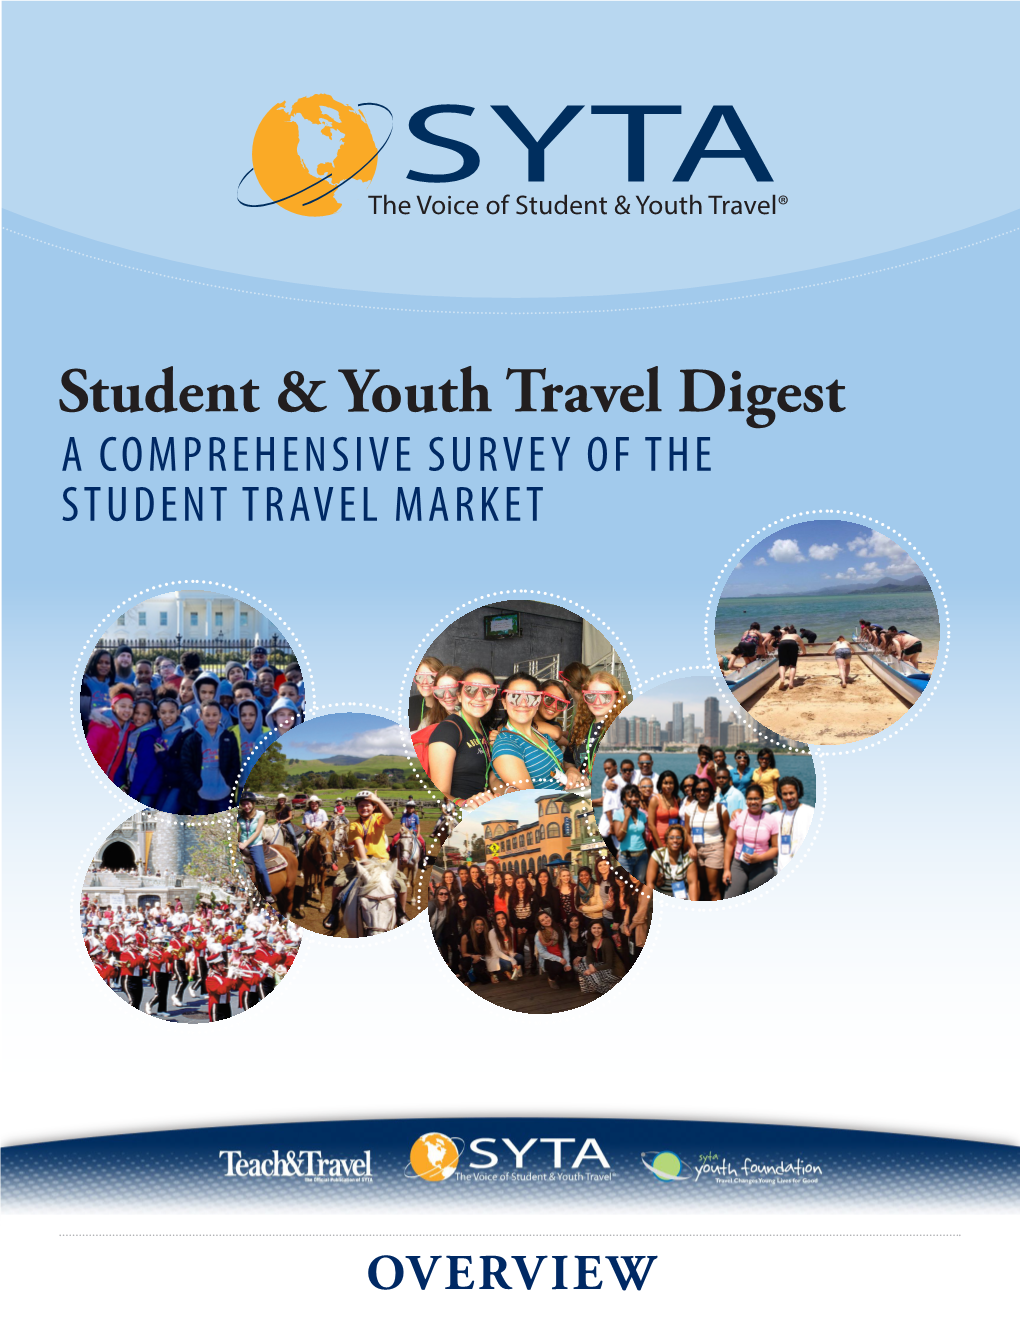 Student & Youth Travel Digest – Overview (PDF)